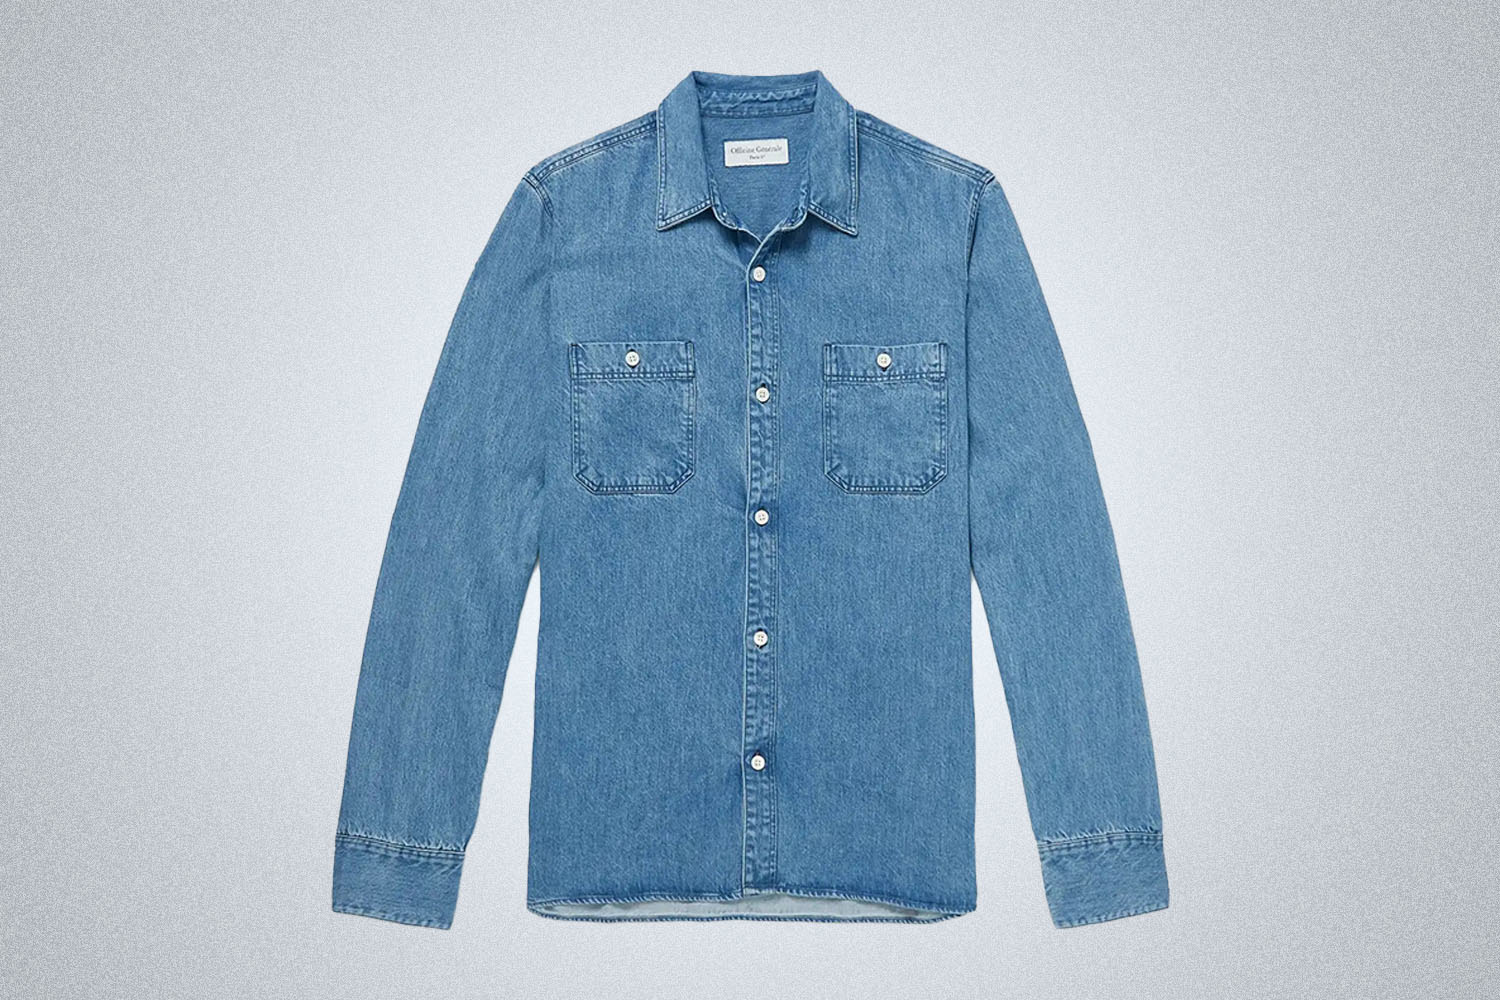 a light blue Officine Generale tencil snap shirt from Mr. Porter on a grey background